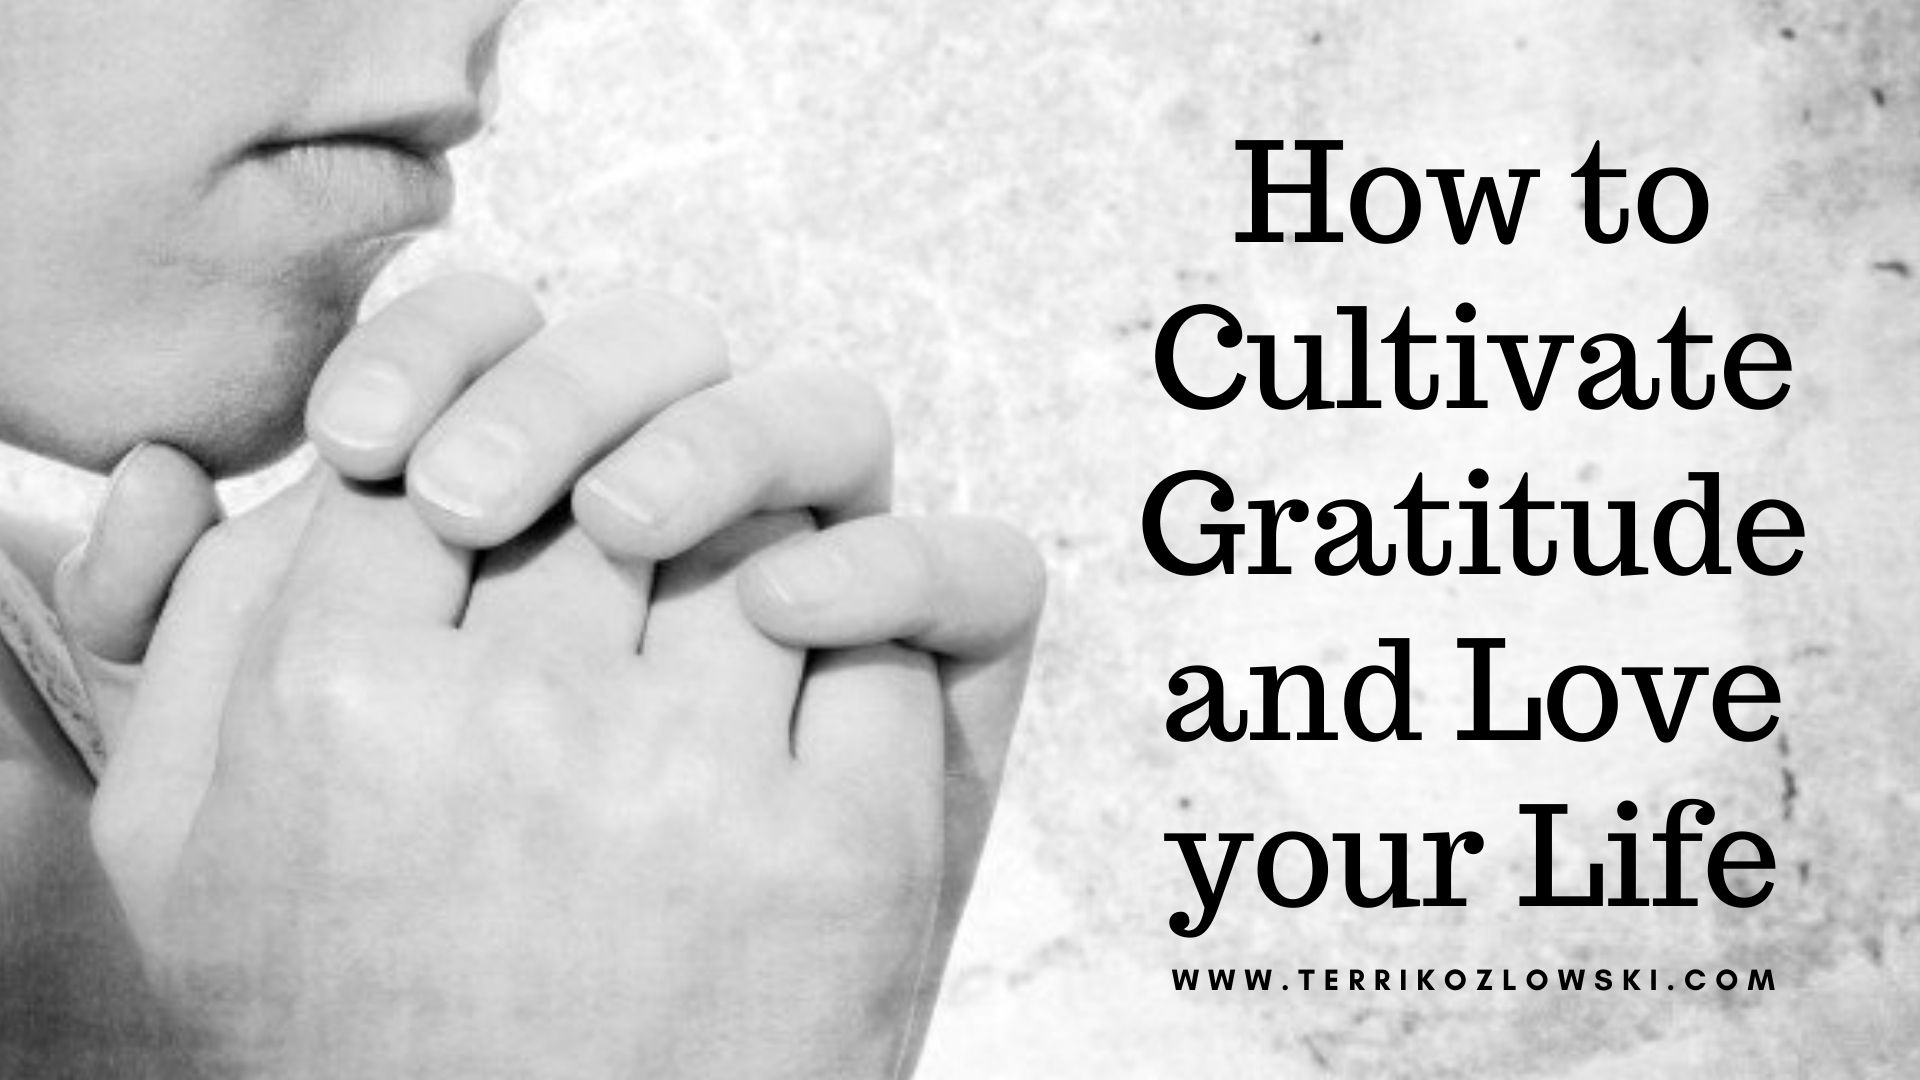 How to Cultivate Gratitude and Love Your Life